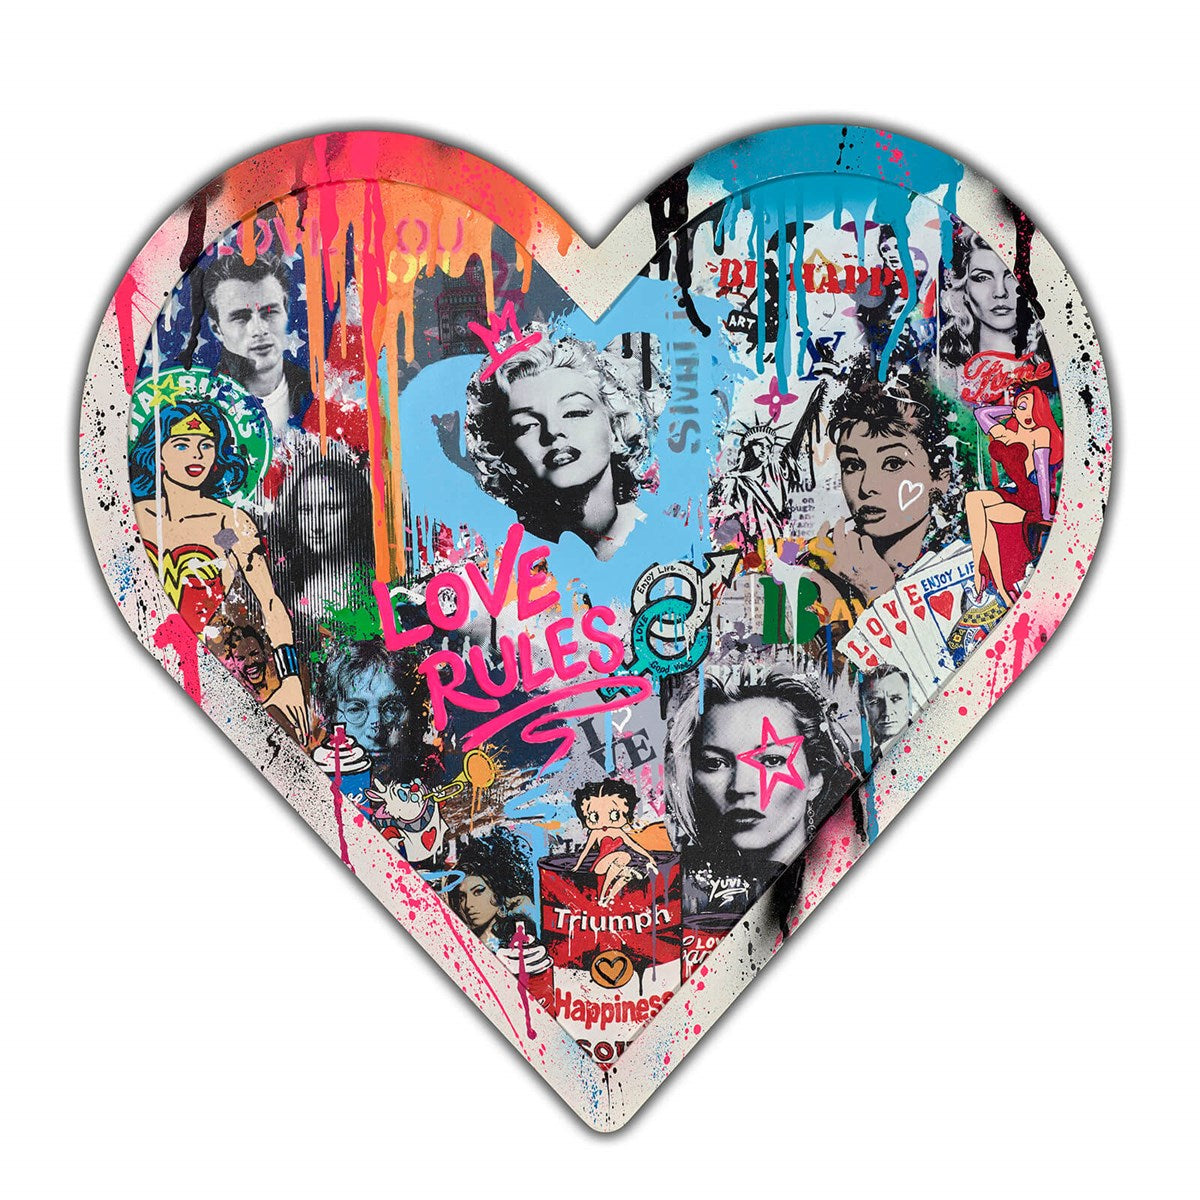 Love Rules limited edition print by Yuvi